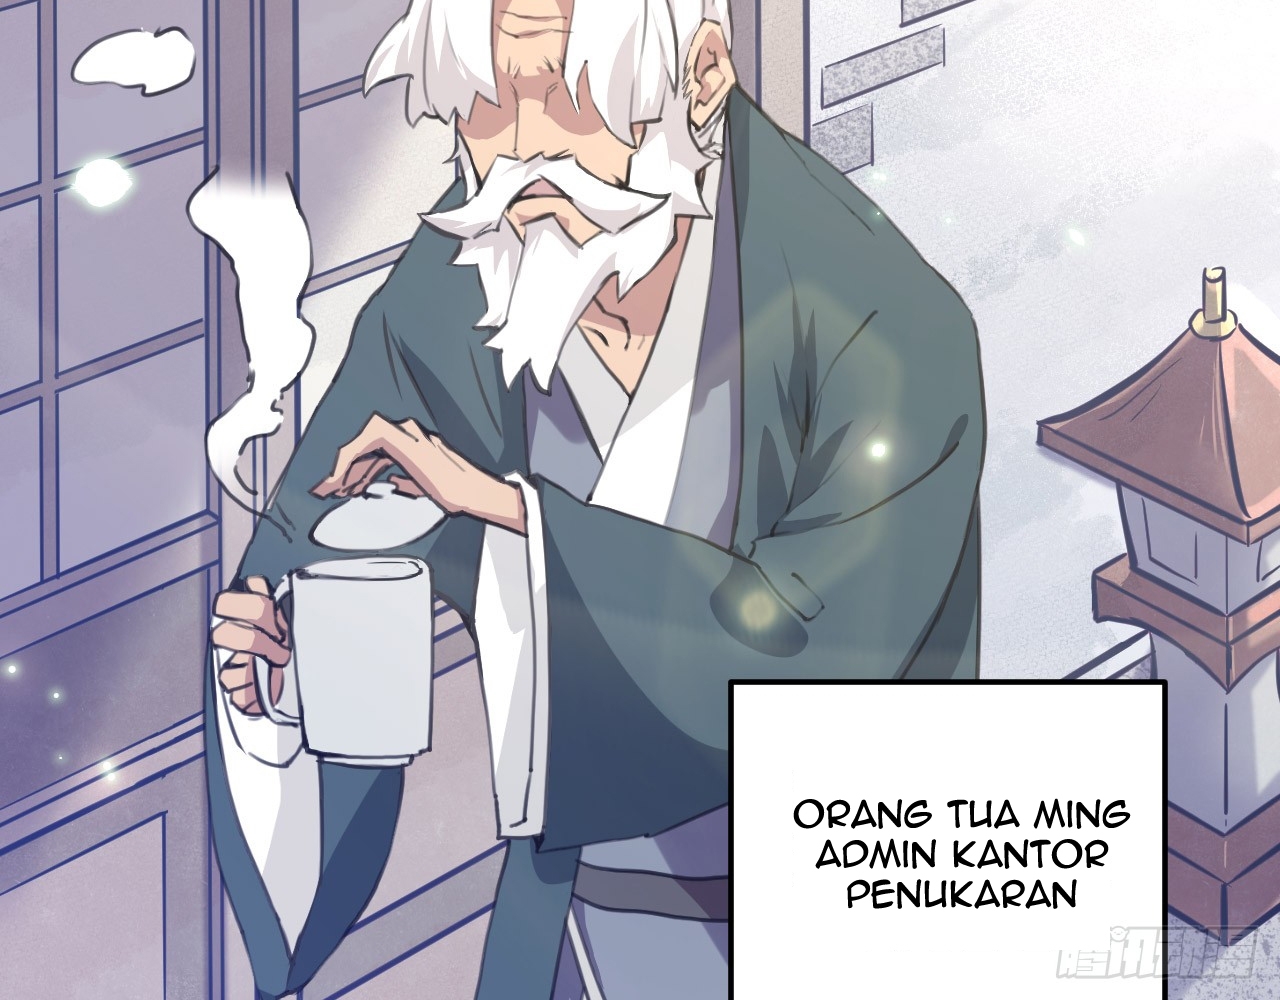 Monk From the Future Chapter 21